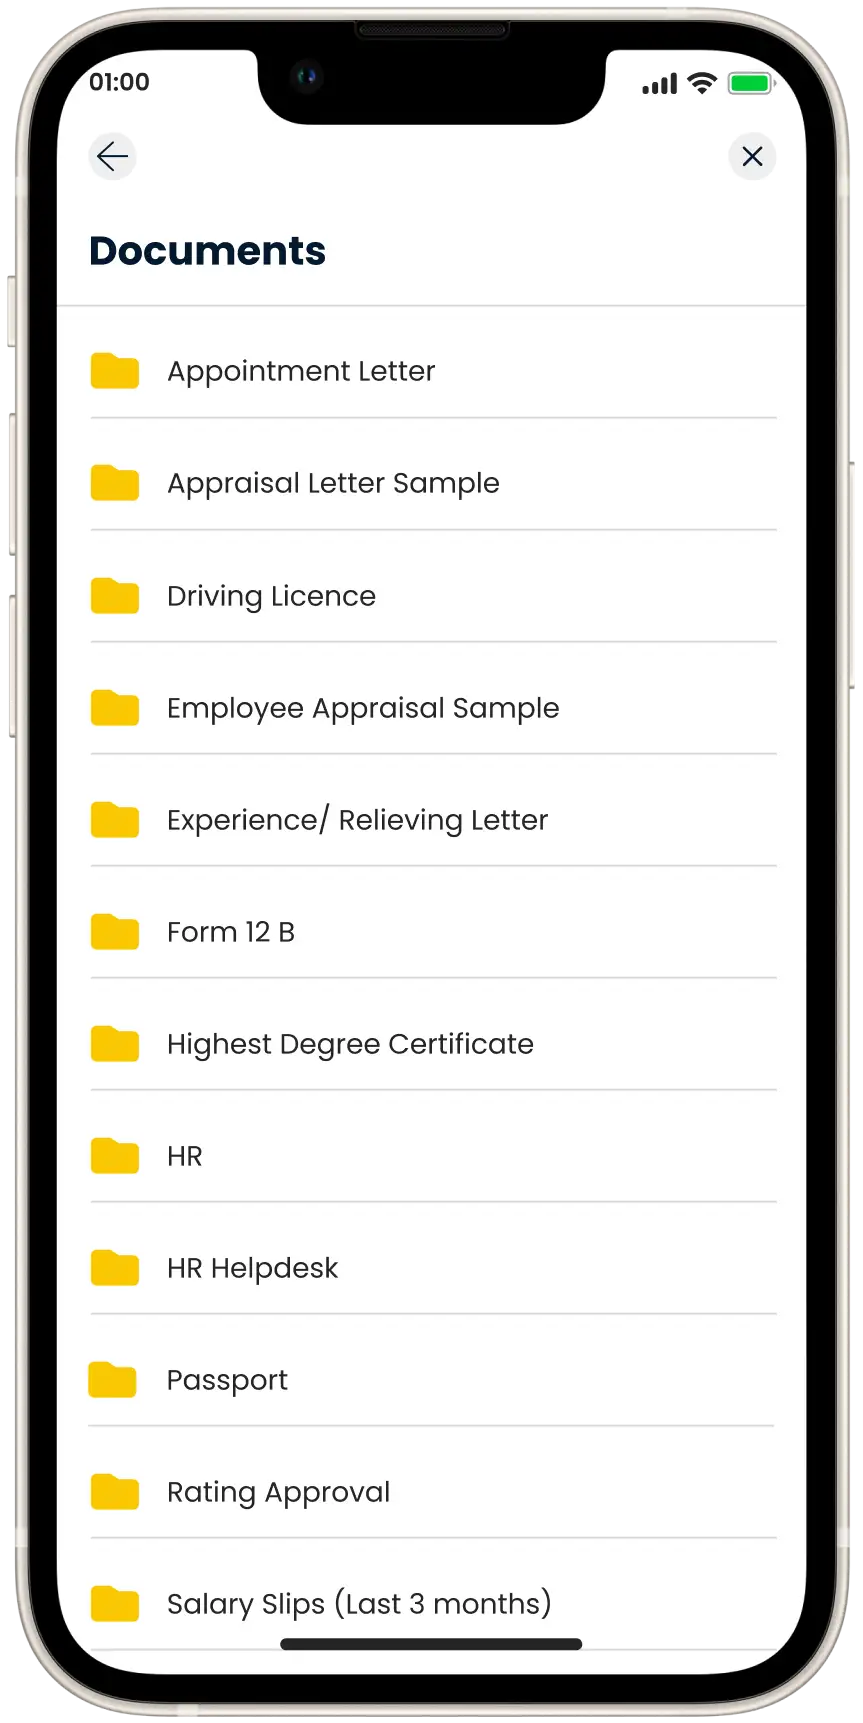 Personal documents repository